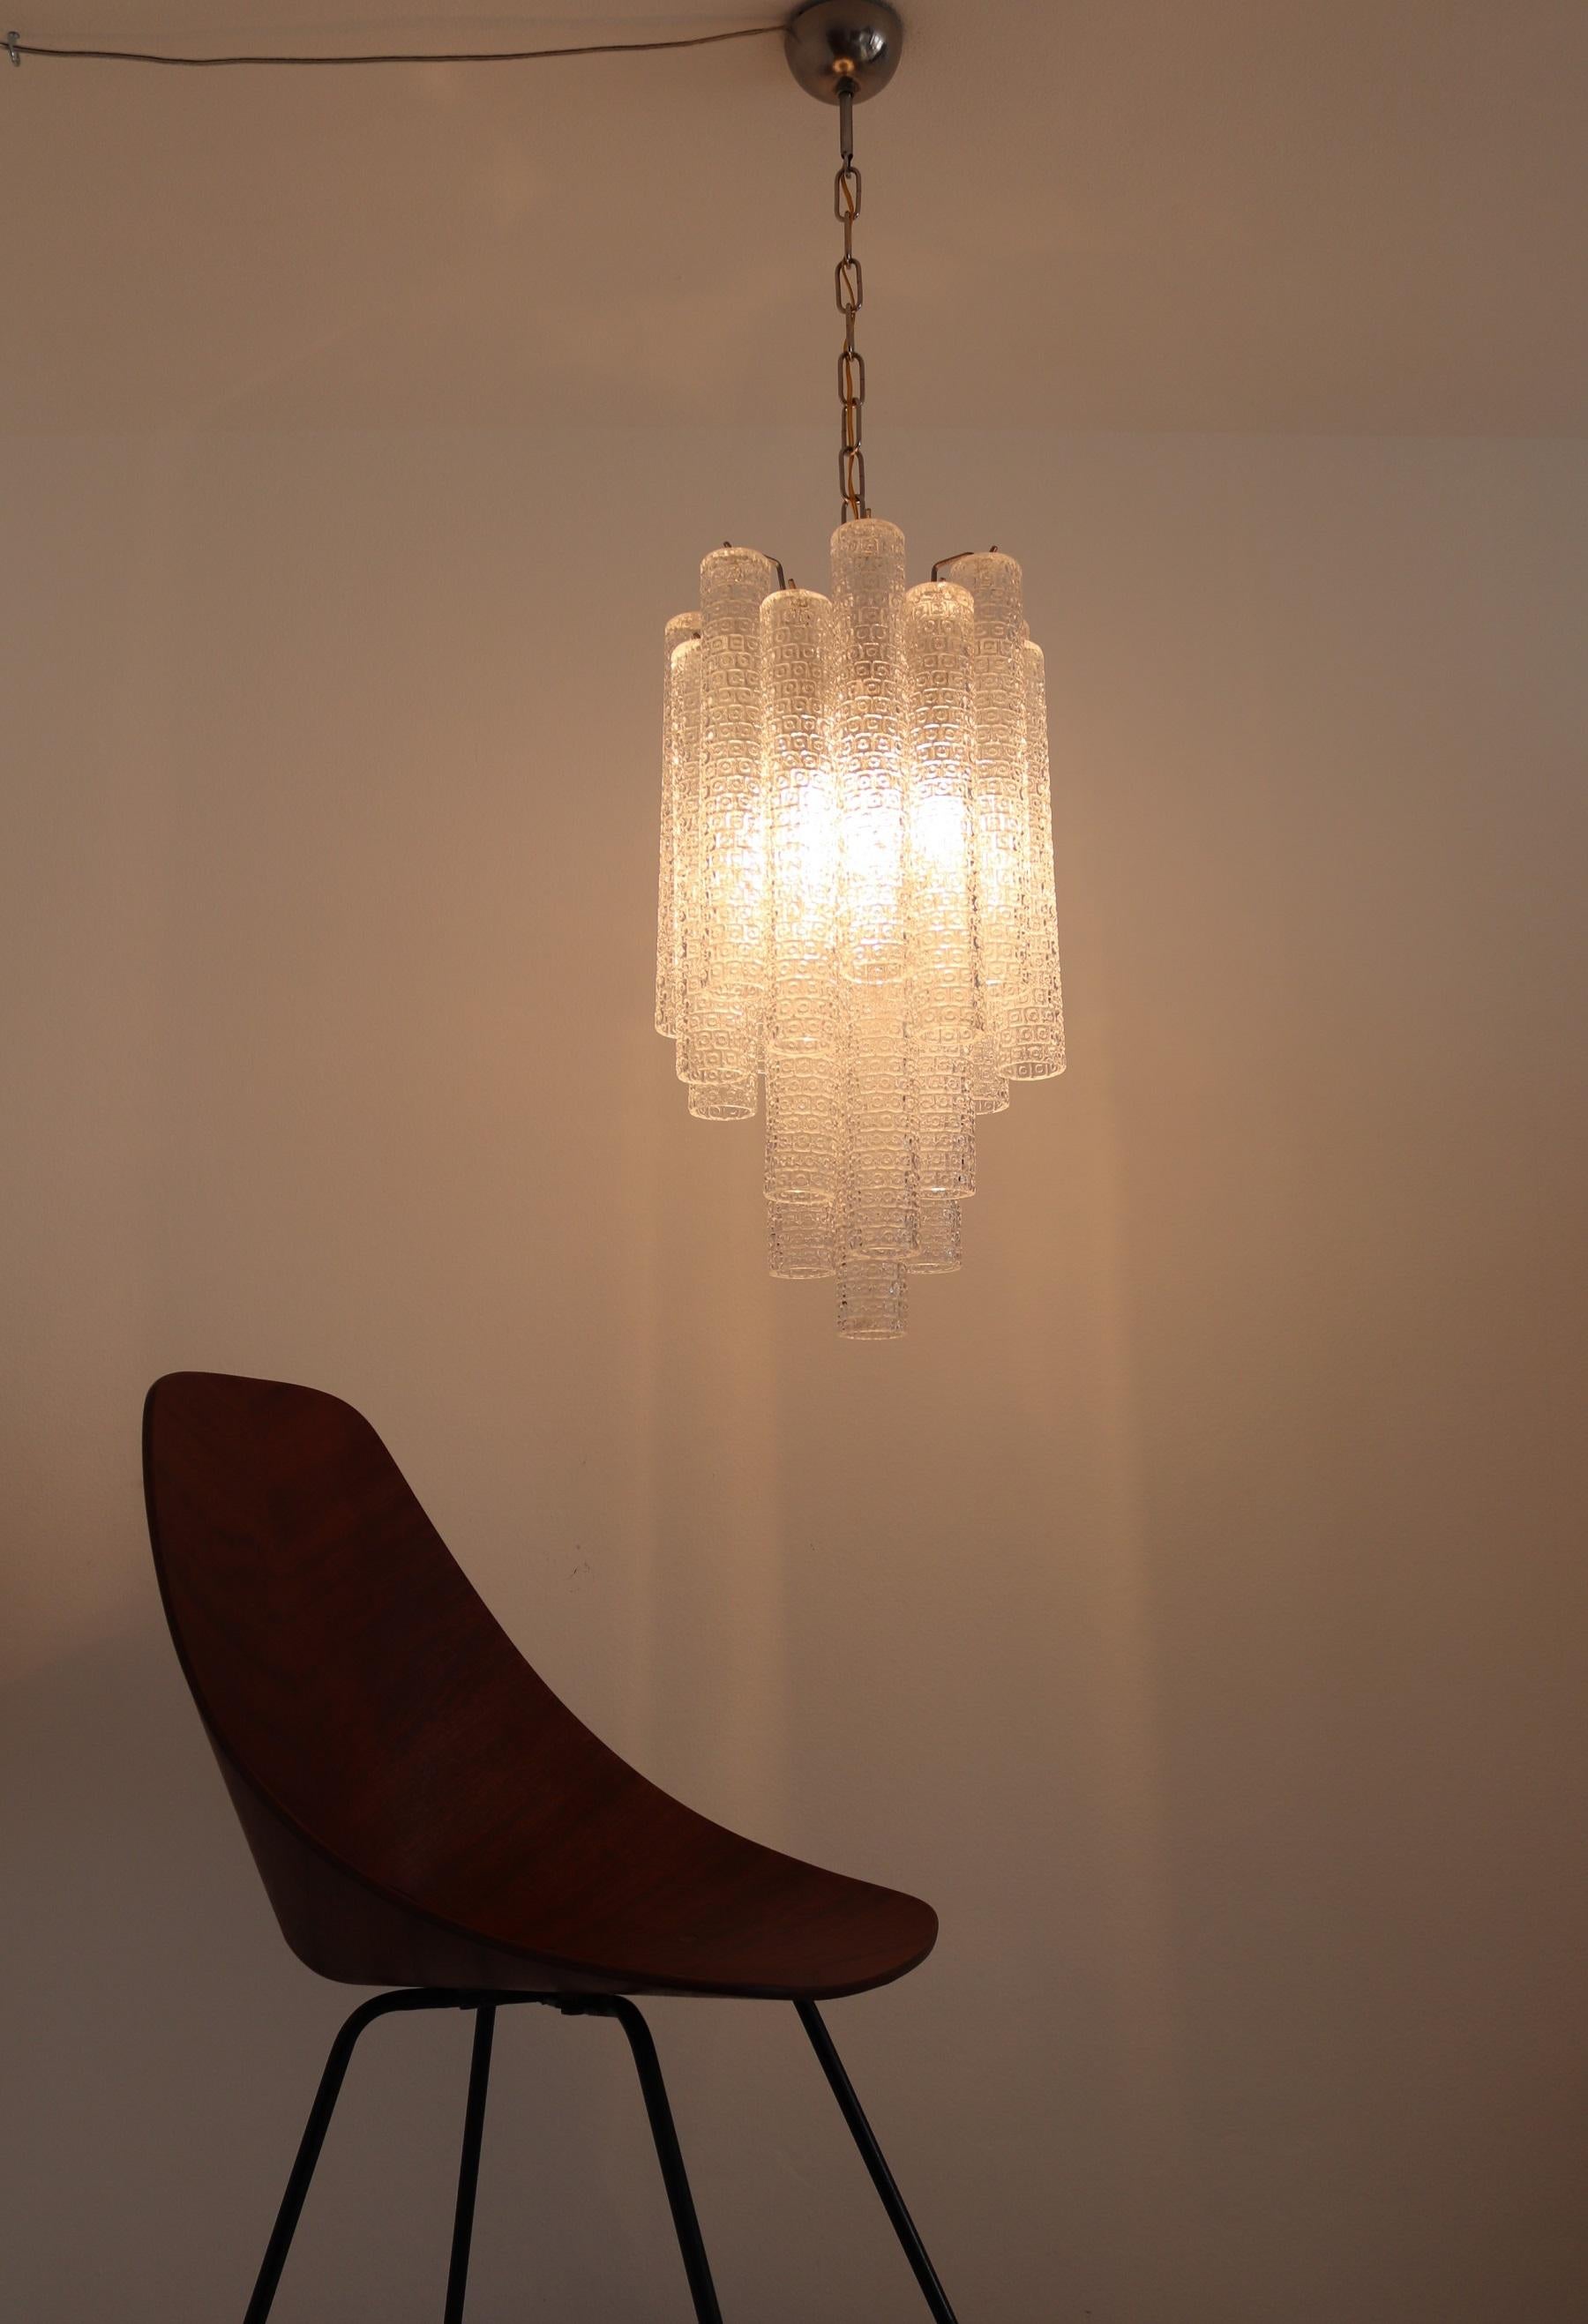 Italian Midcentury Murano Glass Crystal Tube Chandelier by Venini, 1950s For Sale 7